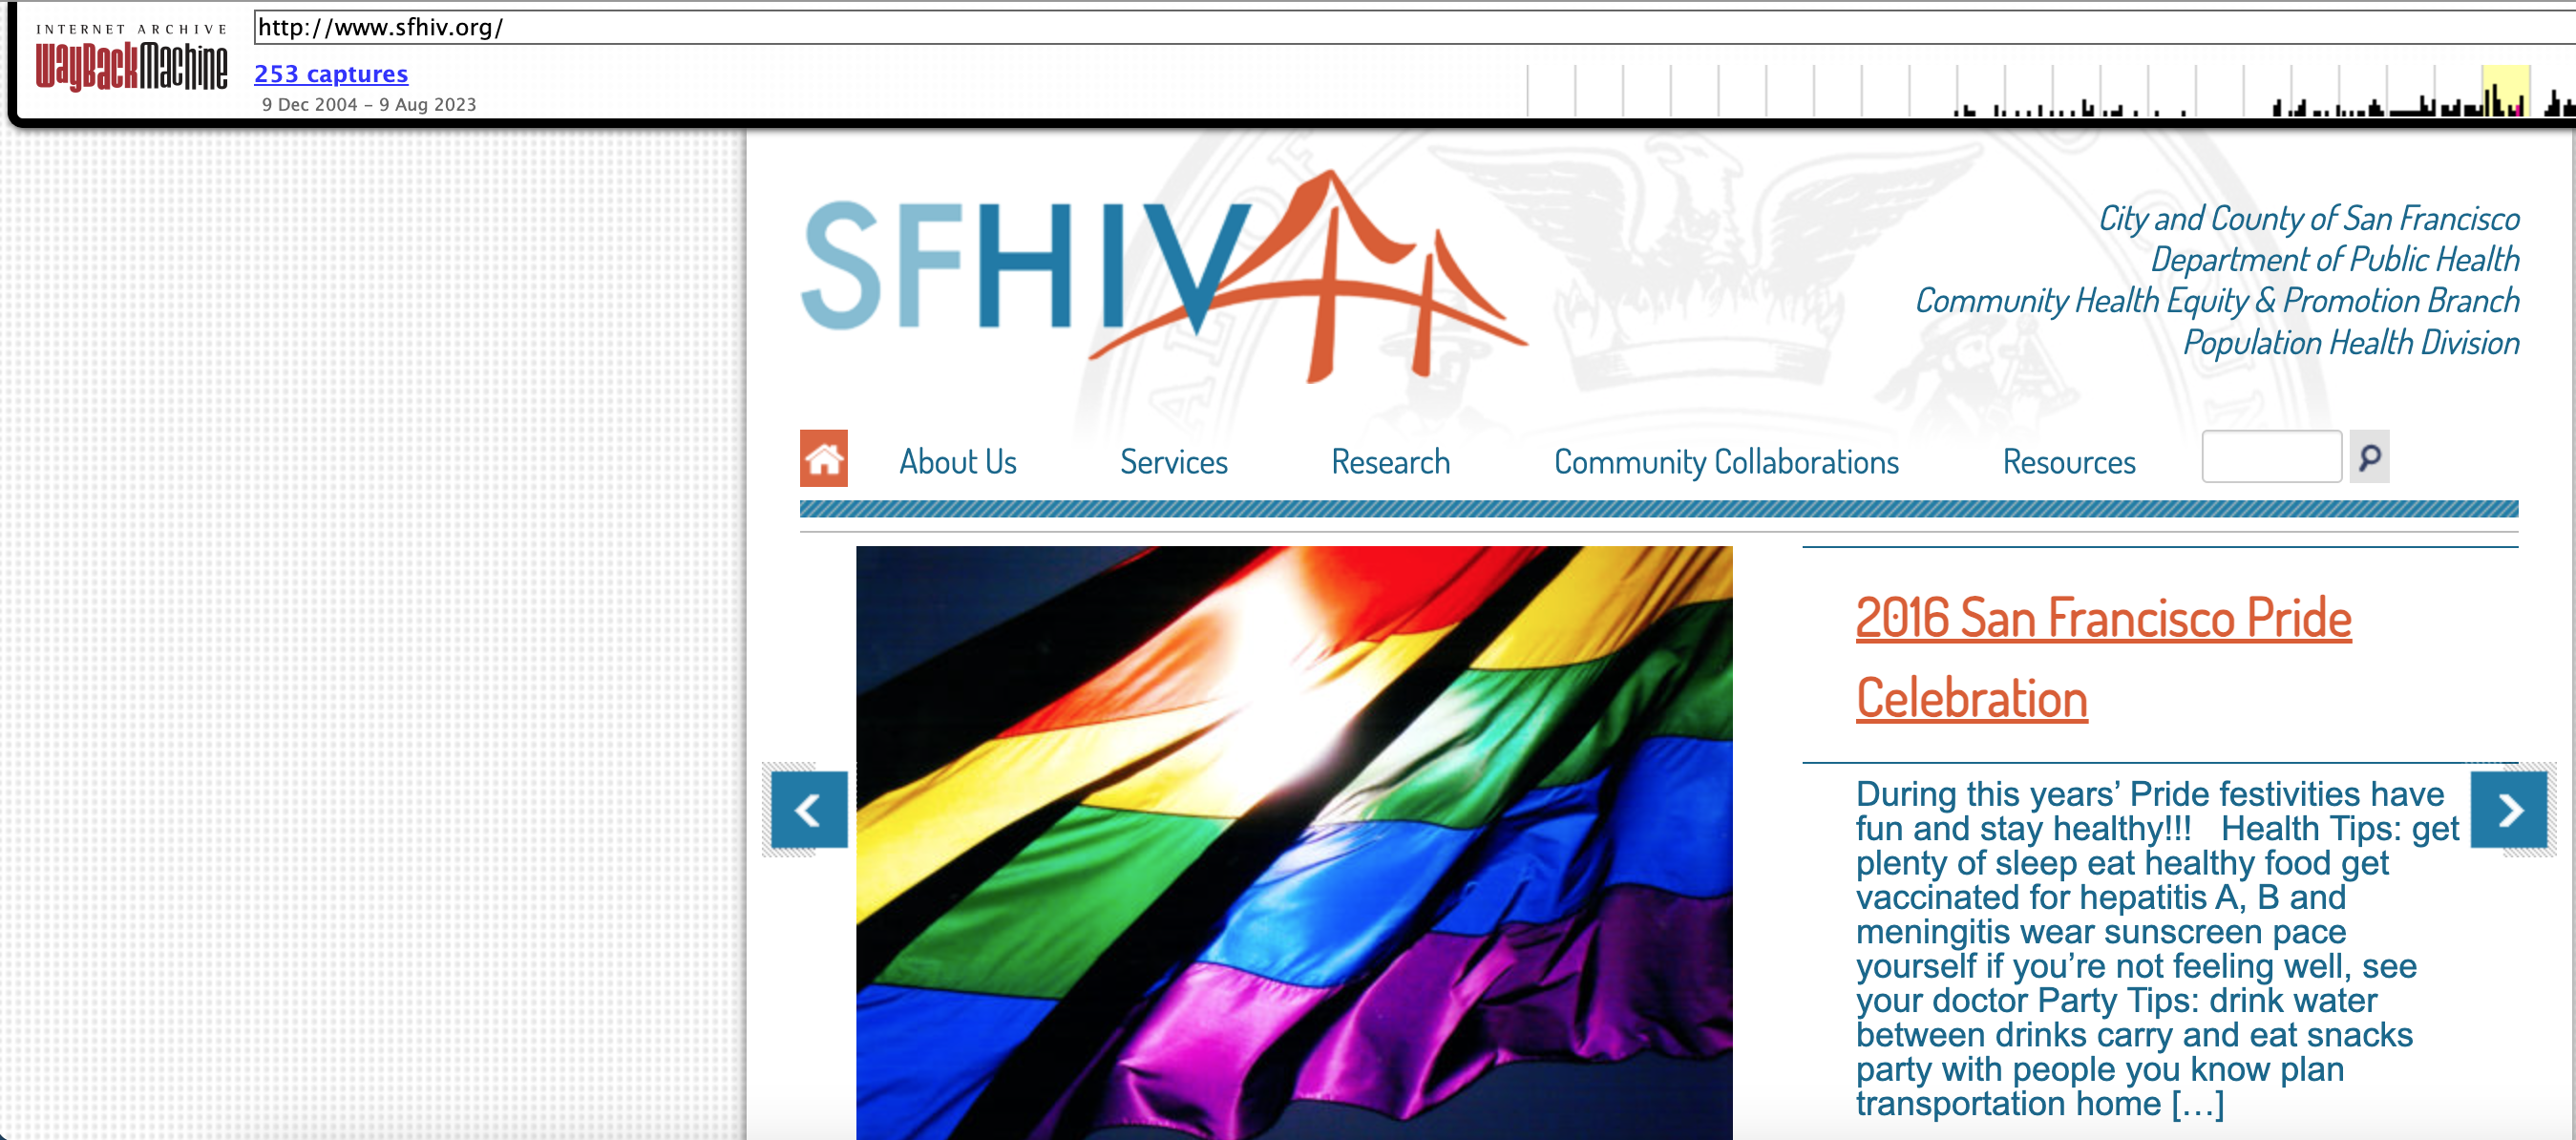 A screenshot of the SFHIV.org website homepage in 2016.